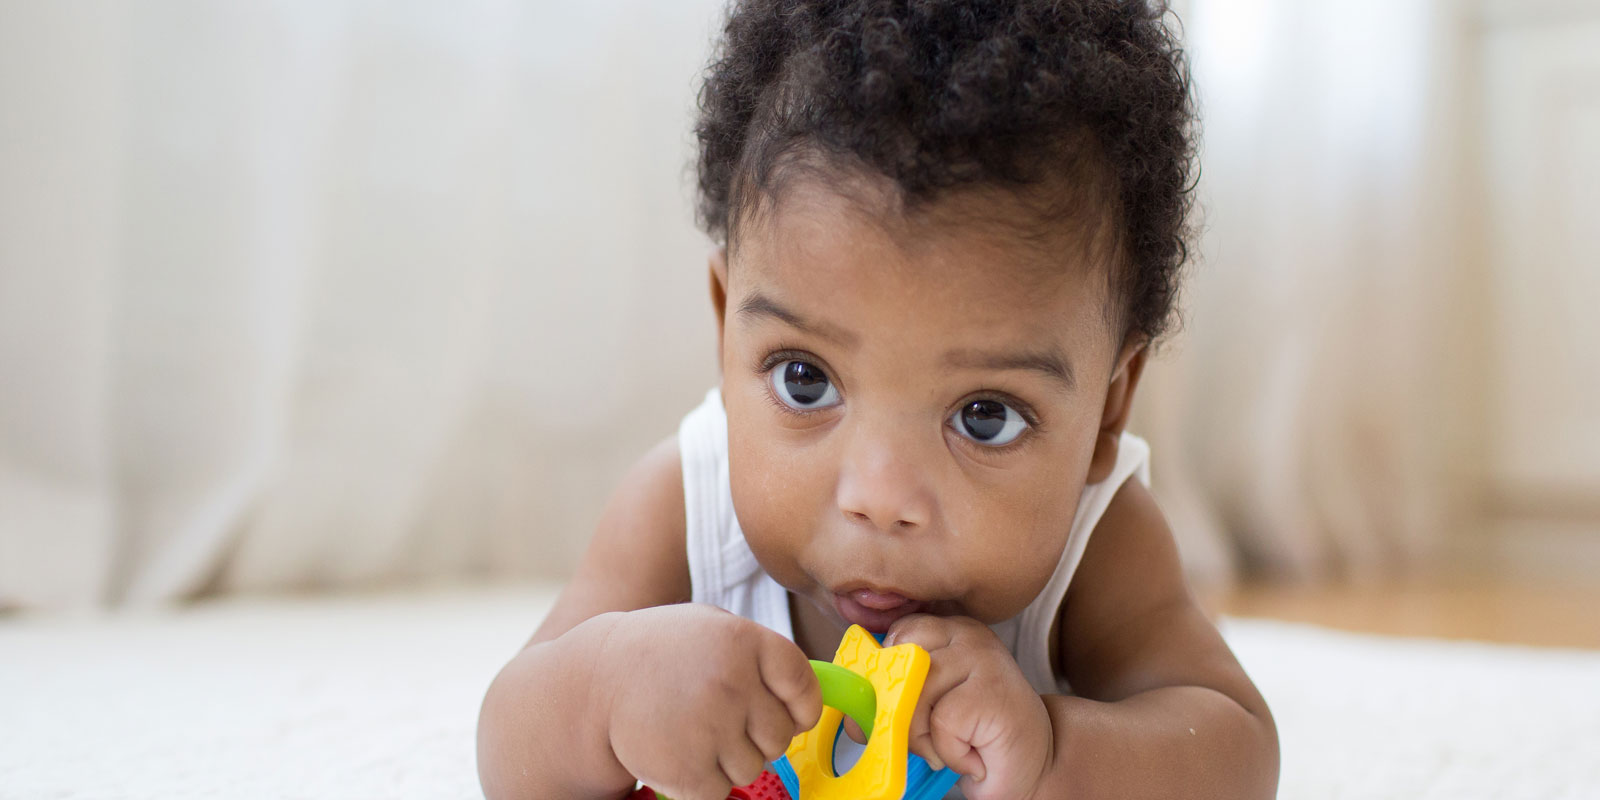 Baby Physical Development: Milestones and Tips for Parents